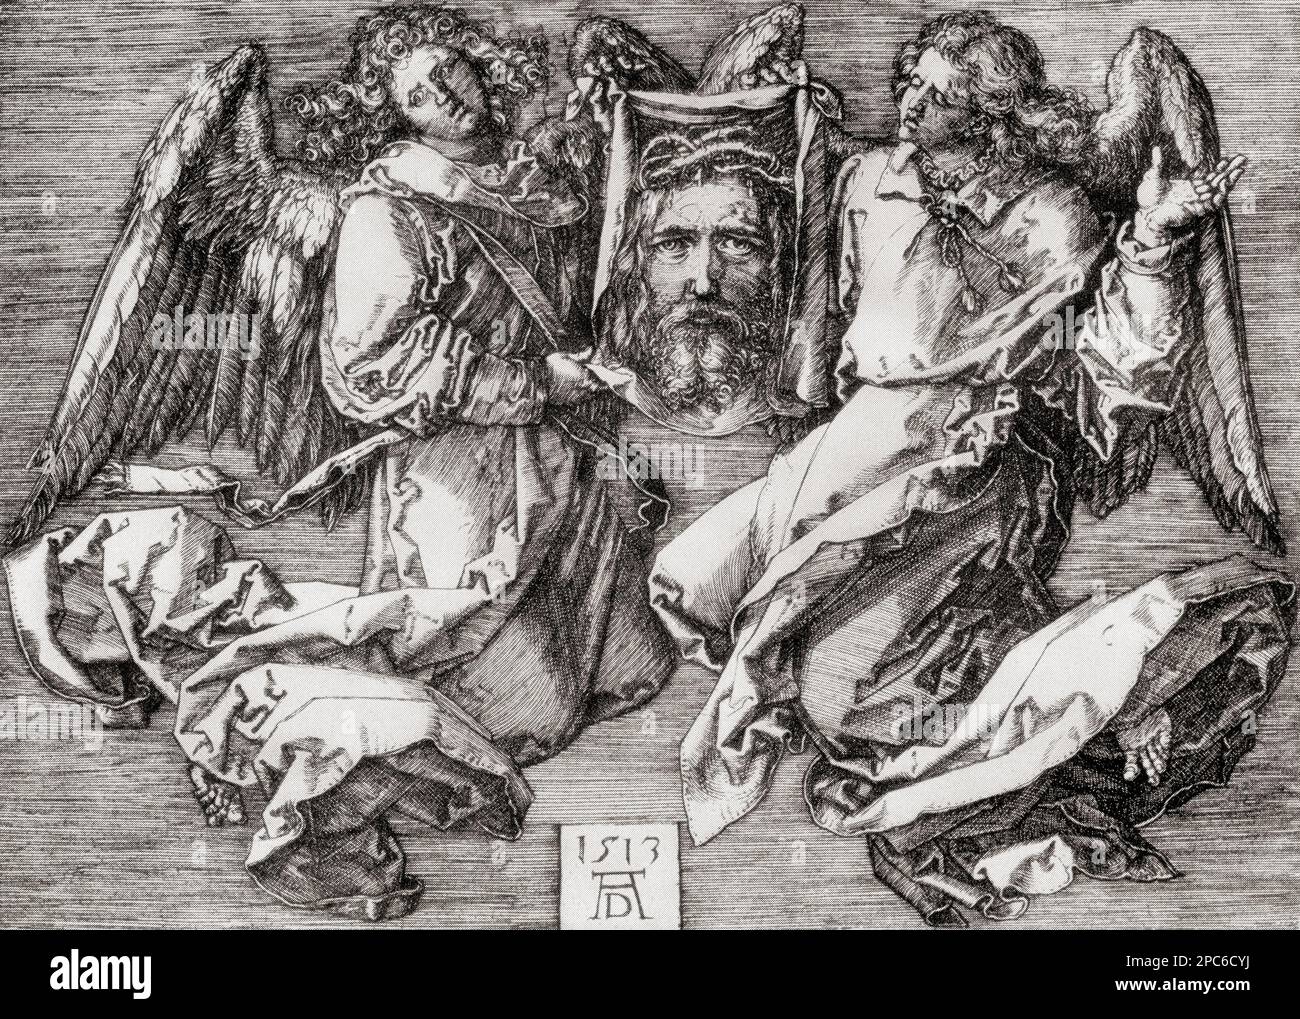 Sudarium Displayed by Two Angels (Sudarium of St Veronica), after the work by Albrecht Dürer, 1471 – 1528, sometimes spelled in English as Durer.  German painter, printmaker, and theorist of the German Renaissance.  From Albrecht Dürer, Sein Leben und eine Auswahl seiner Werke or His life and a selection of his works, published 1928. Stock Photo